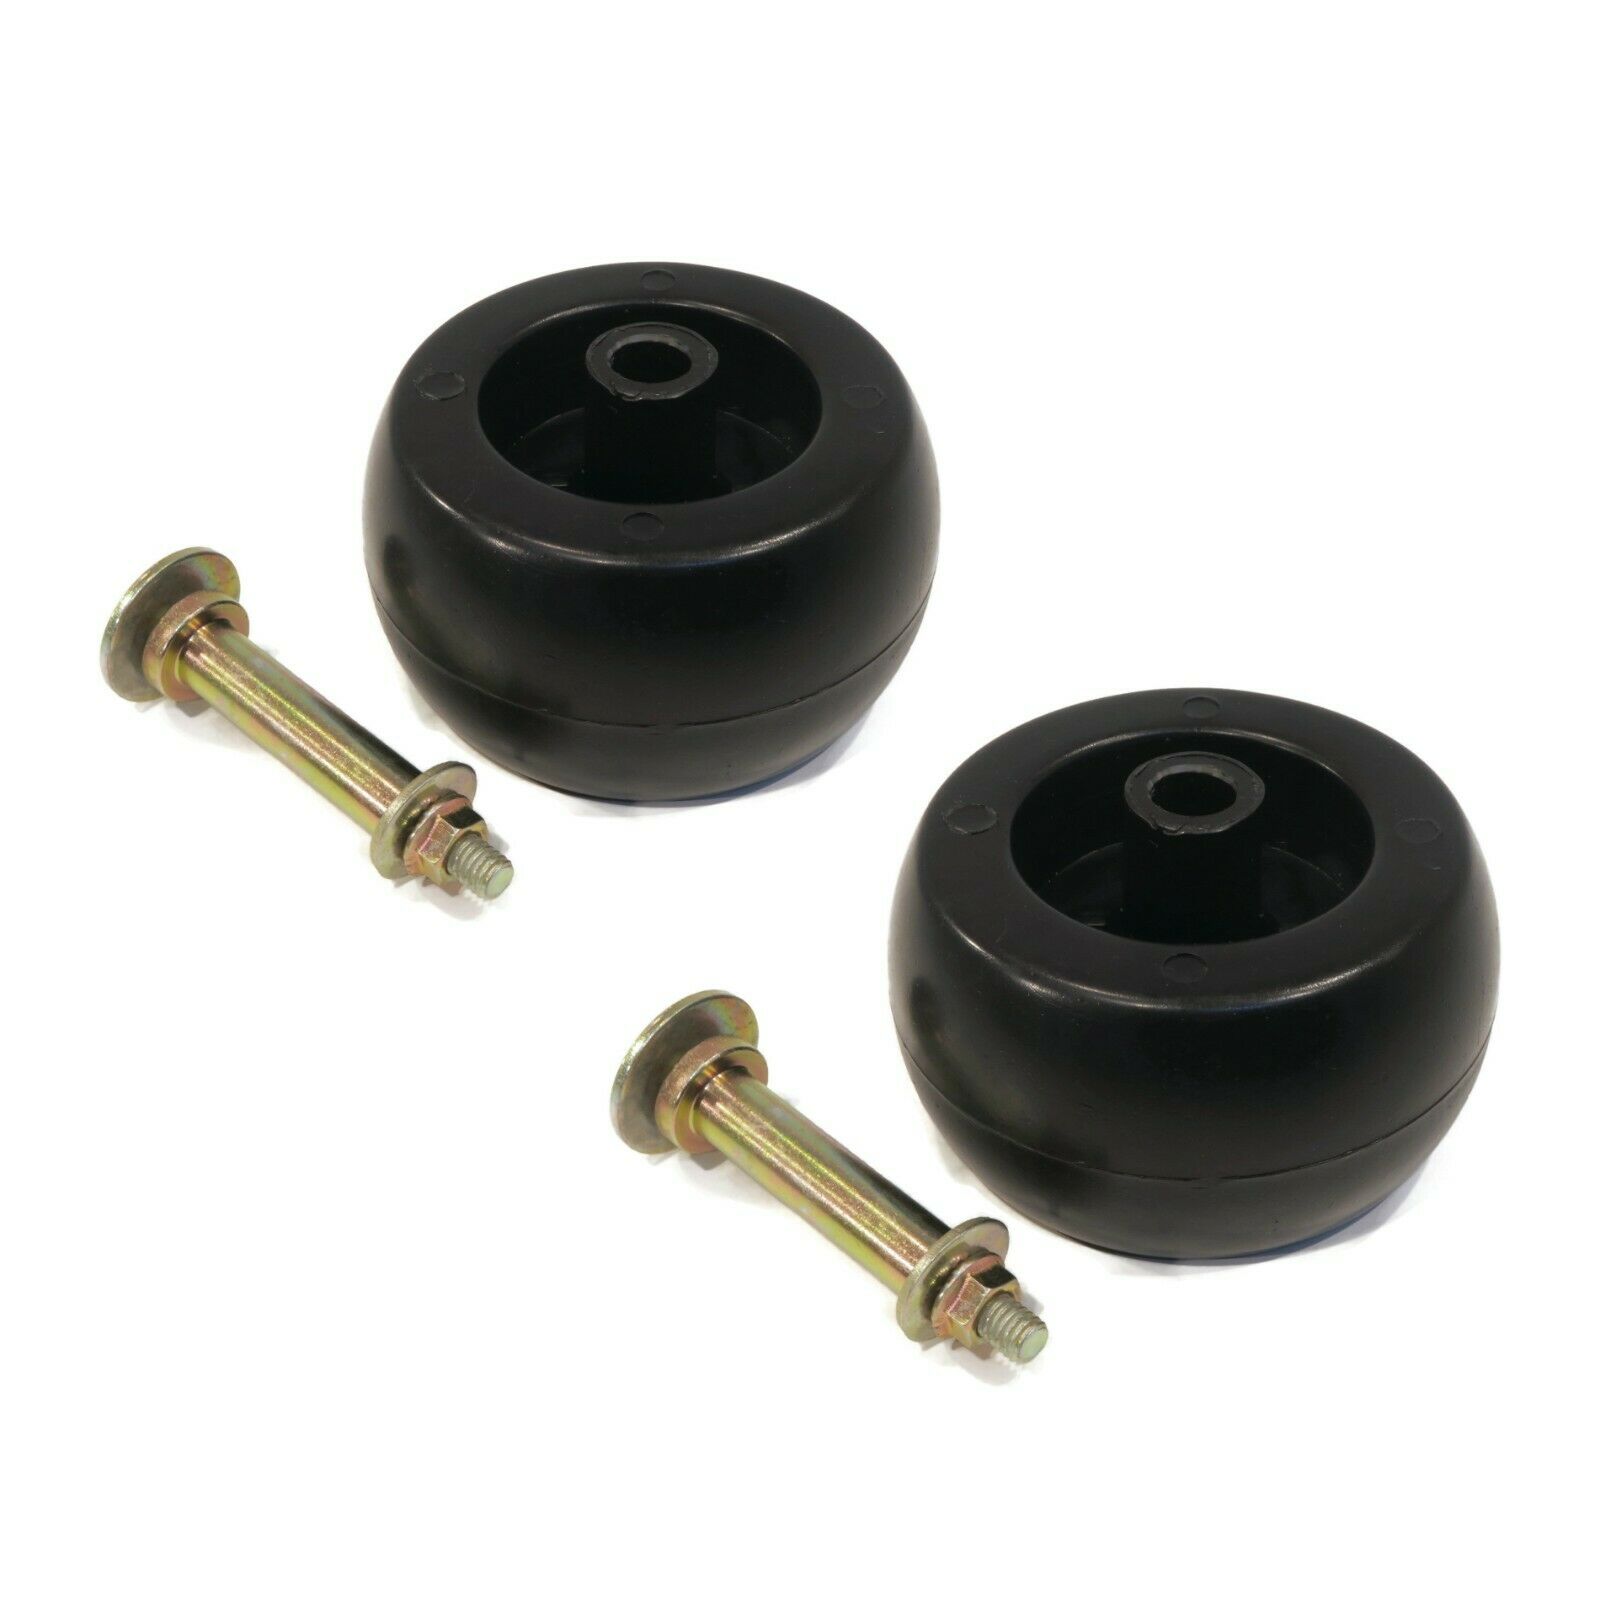 The ROP Shop | (2) Deck Wheel Roller Kits For Stens 210-169 Rotary 10301 Mowers Tractors ZTRs - image 1 of 5